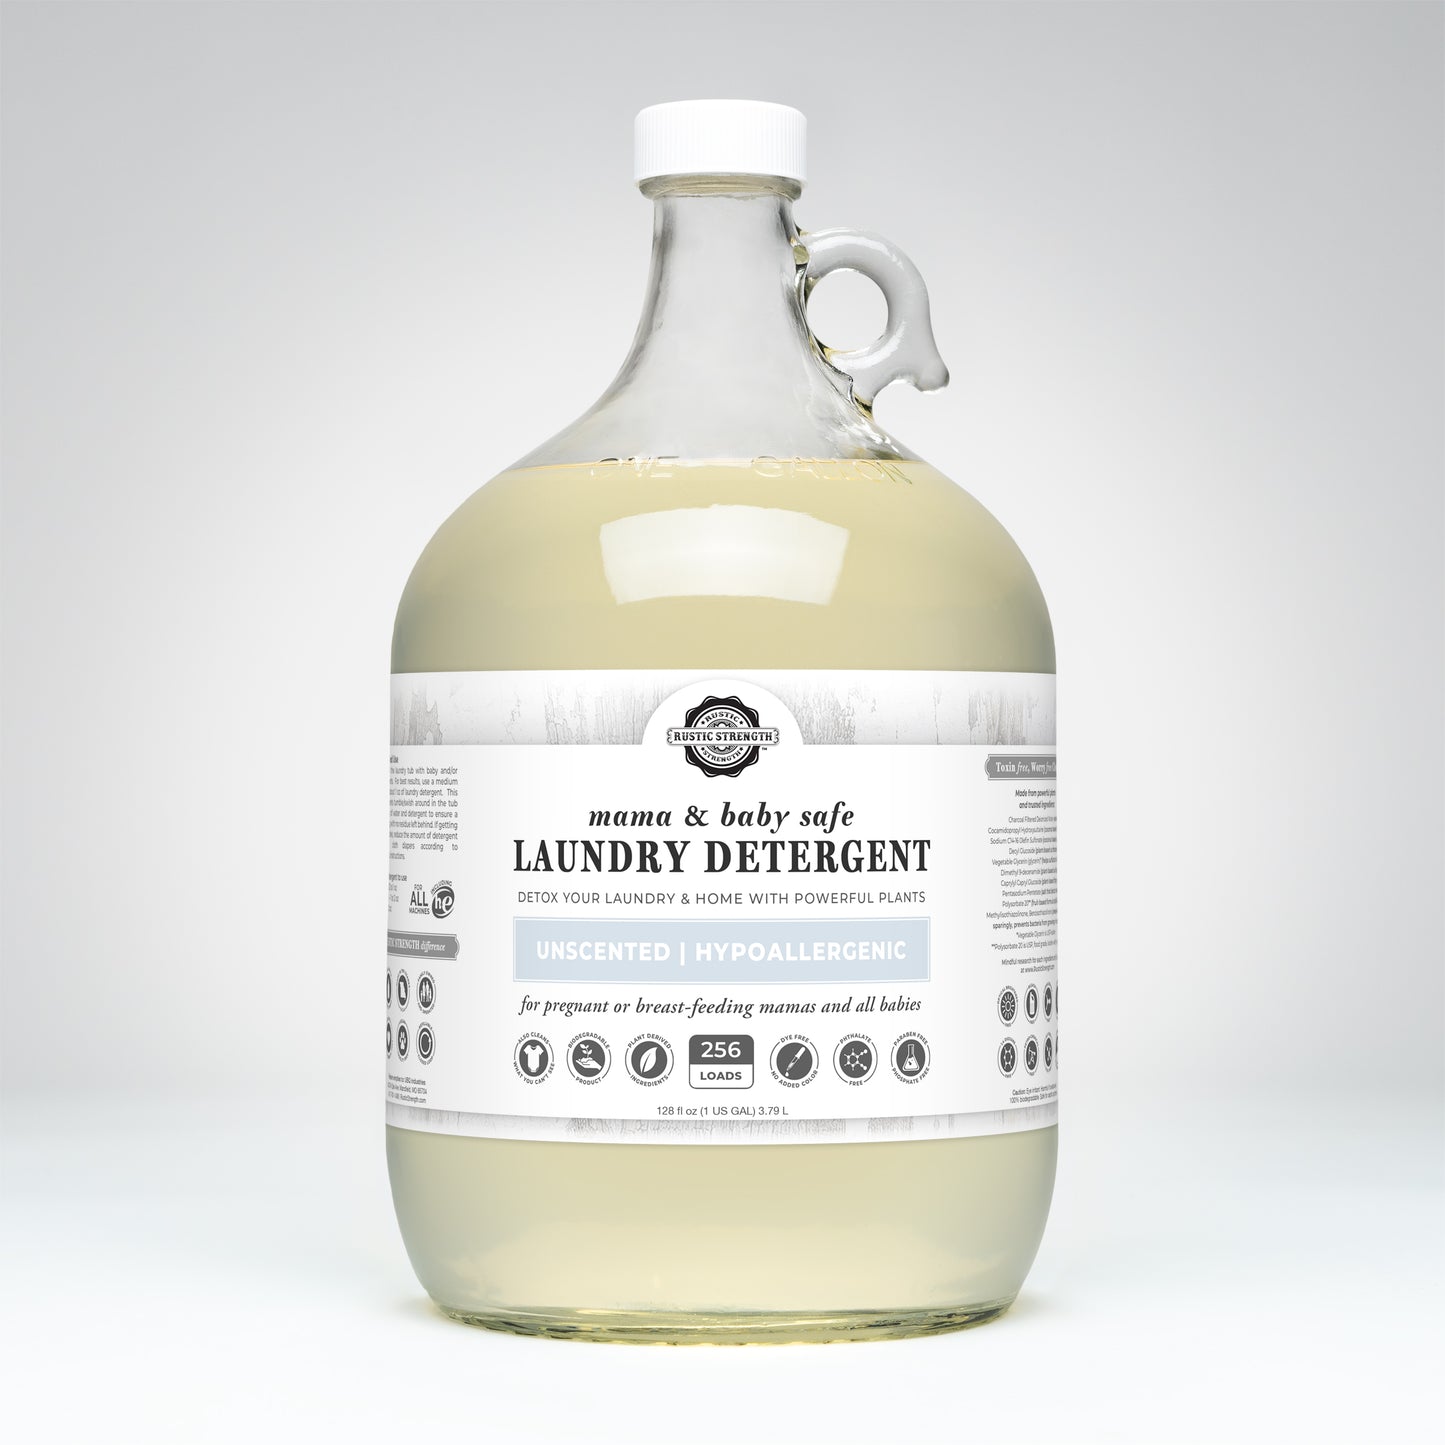 Laundry Detergent - Our Popular Scents